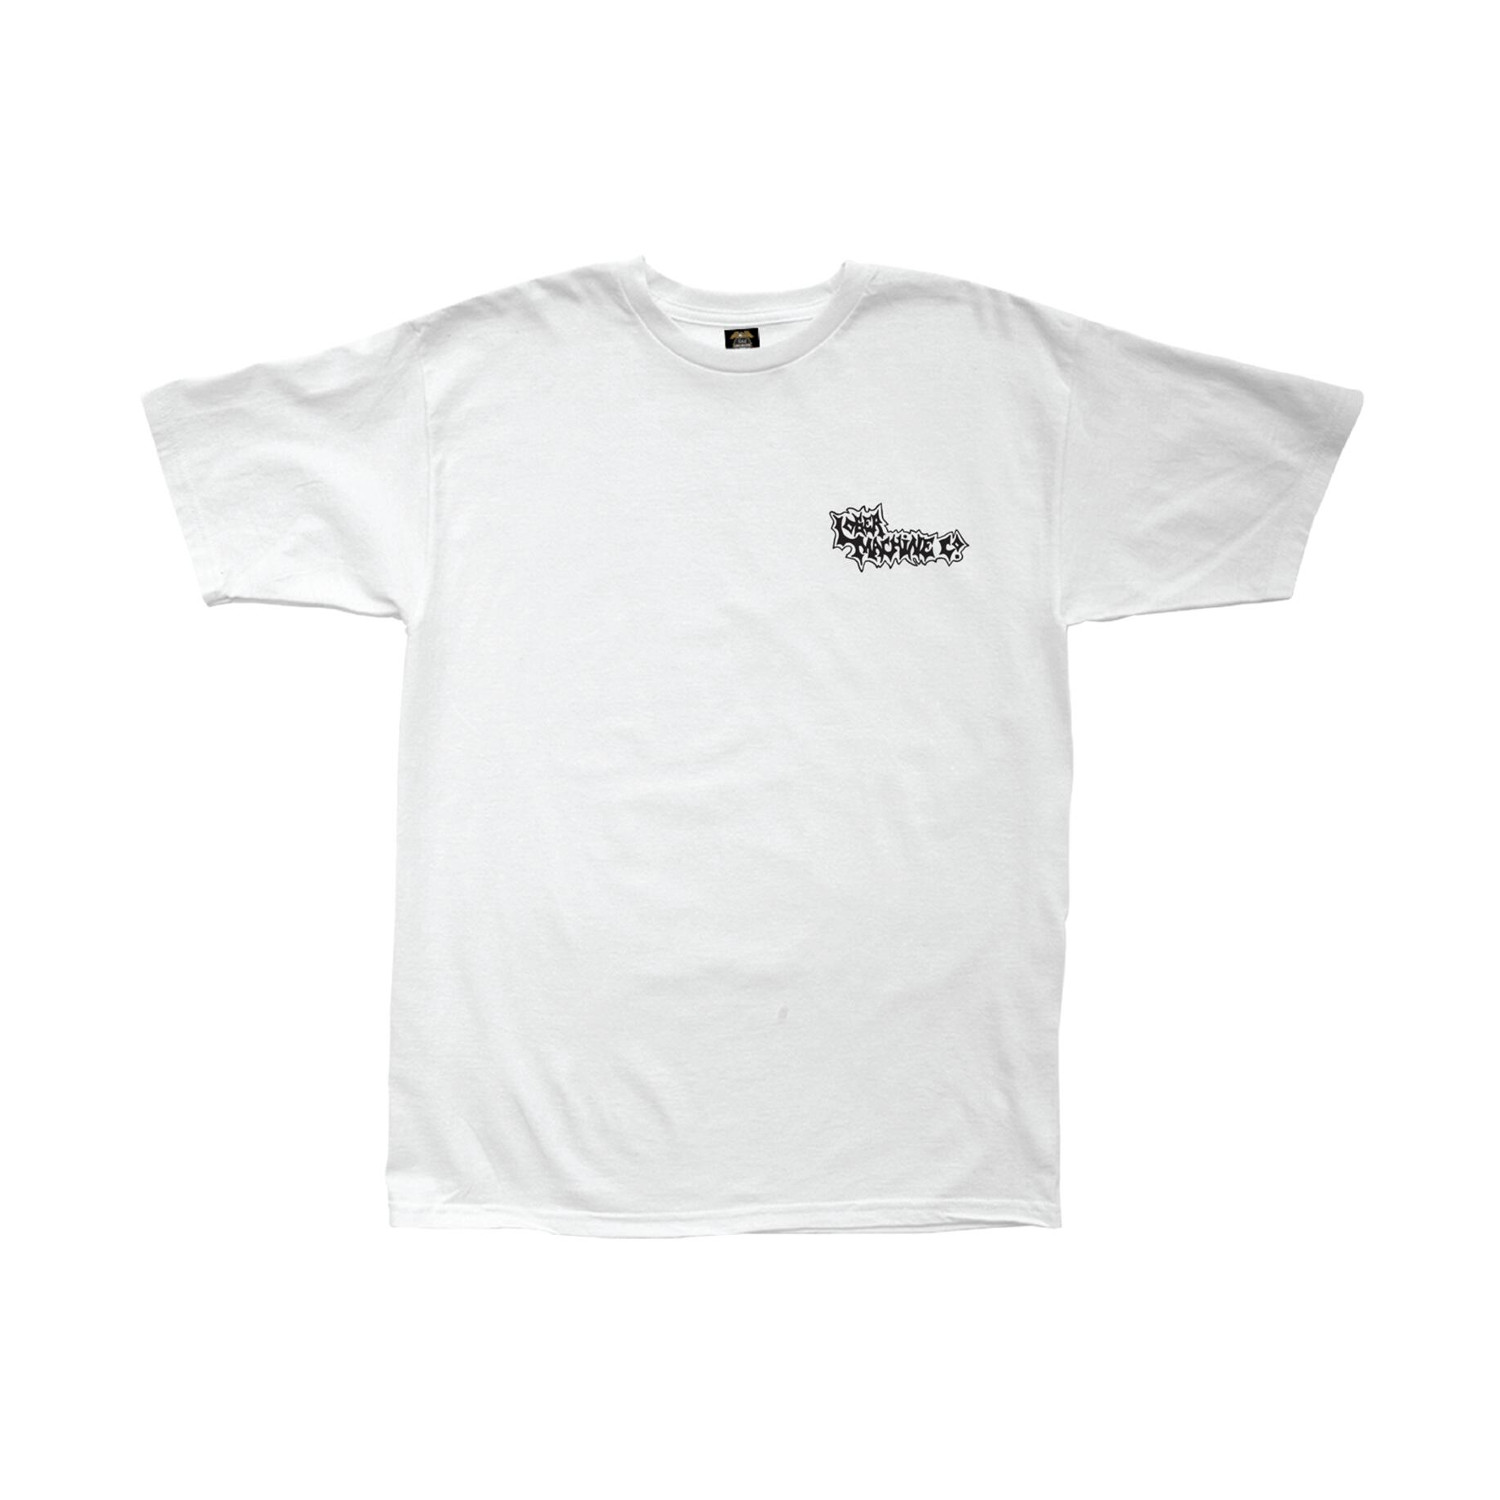 LOSER MACHINE SKATE RATS S/S TEE WHITE – Allstyle Distribution